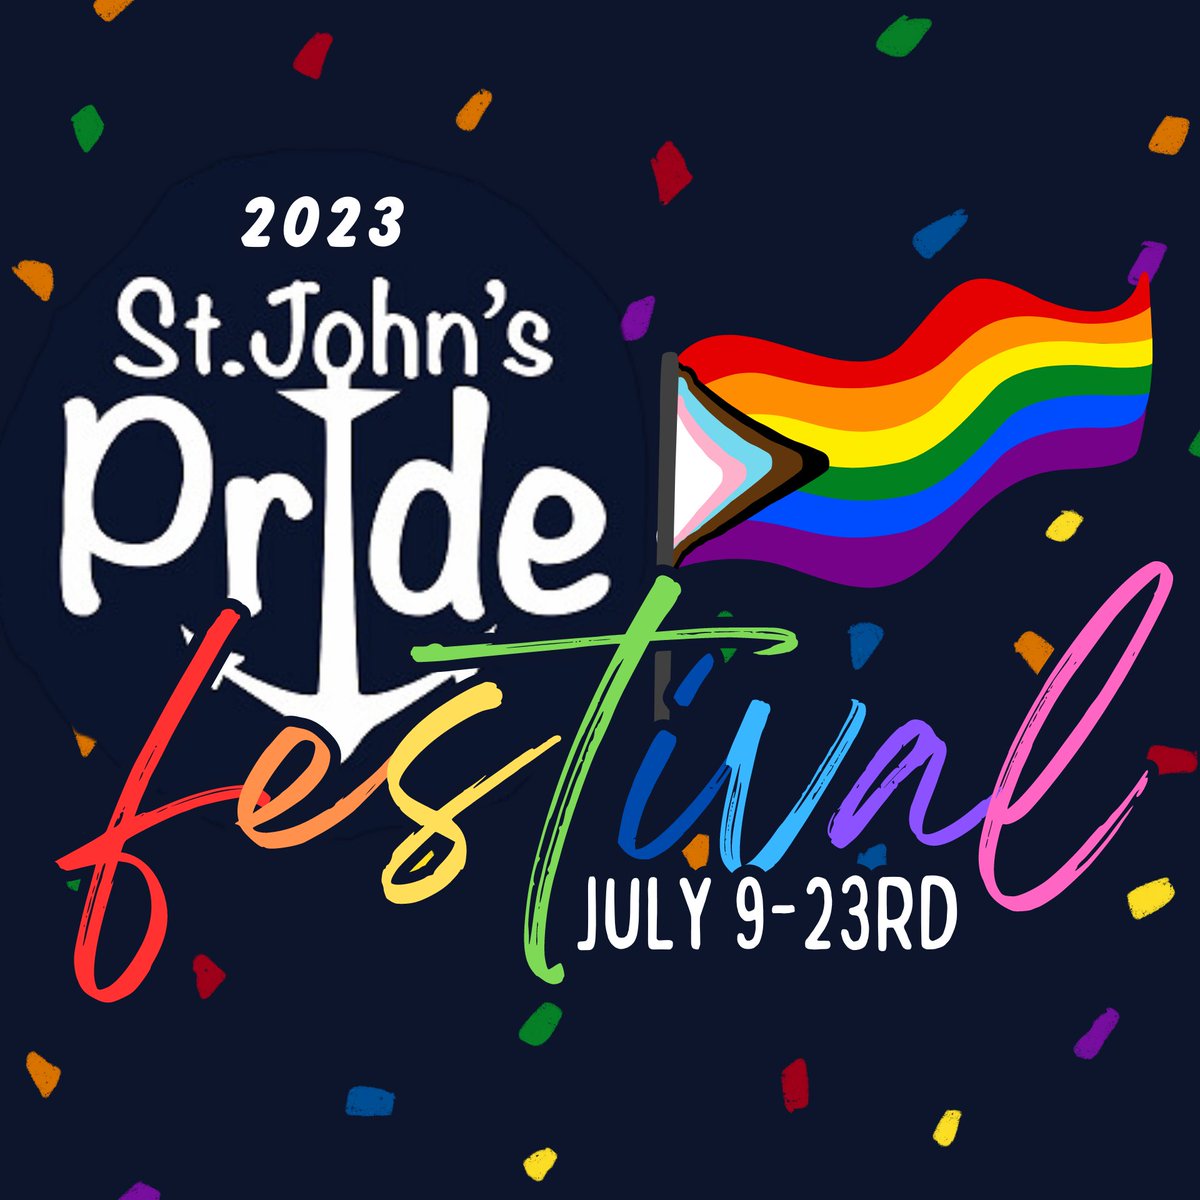 This years official St. John's Pride Festival has been announced! We're kicking things off on July 9th!!! #HappyPrideMonth #PrideFestival #Newfoundland #StJohns #YYT #2SLGBTQIA